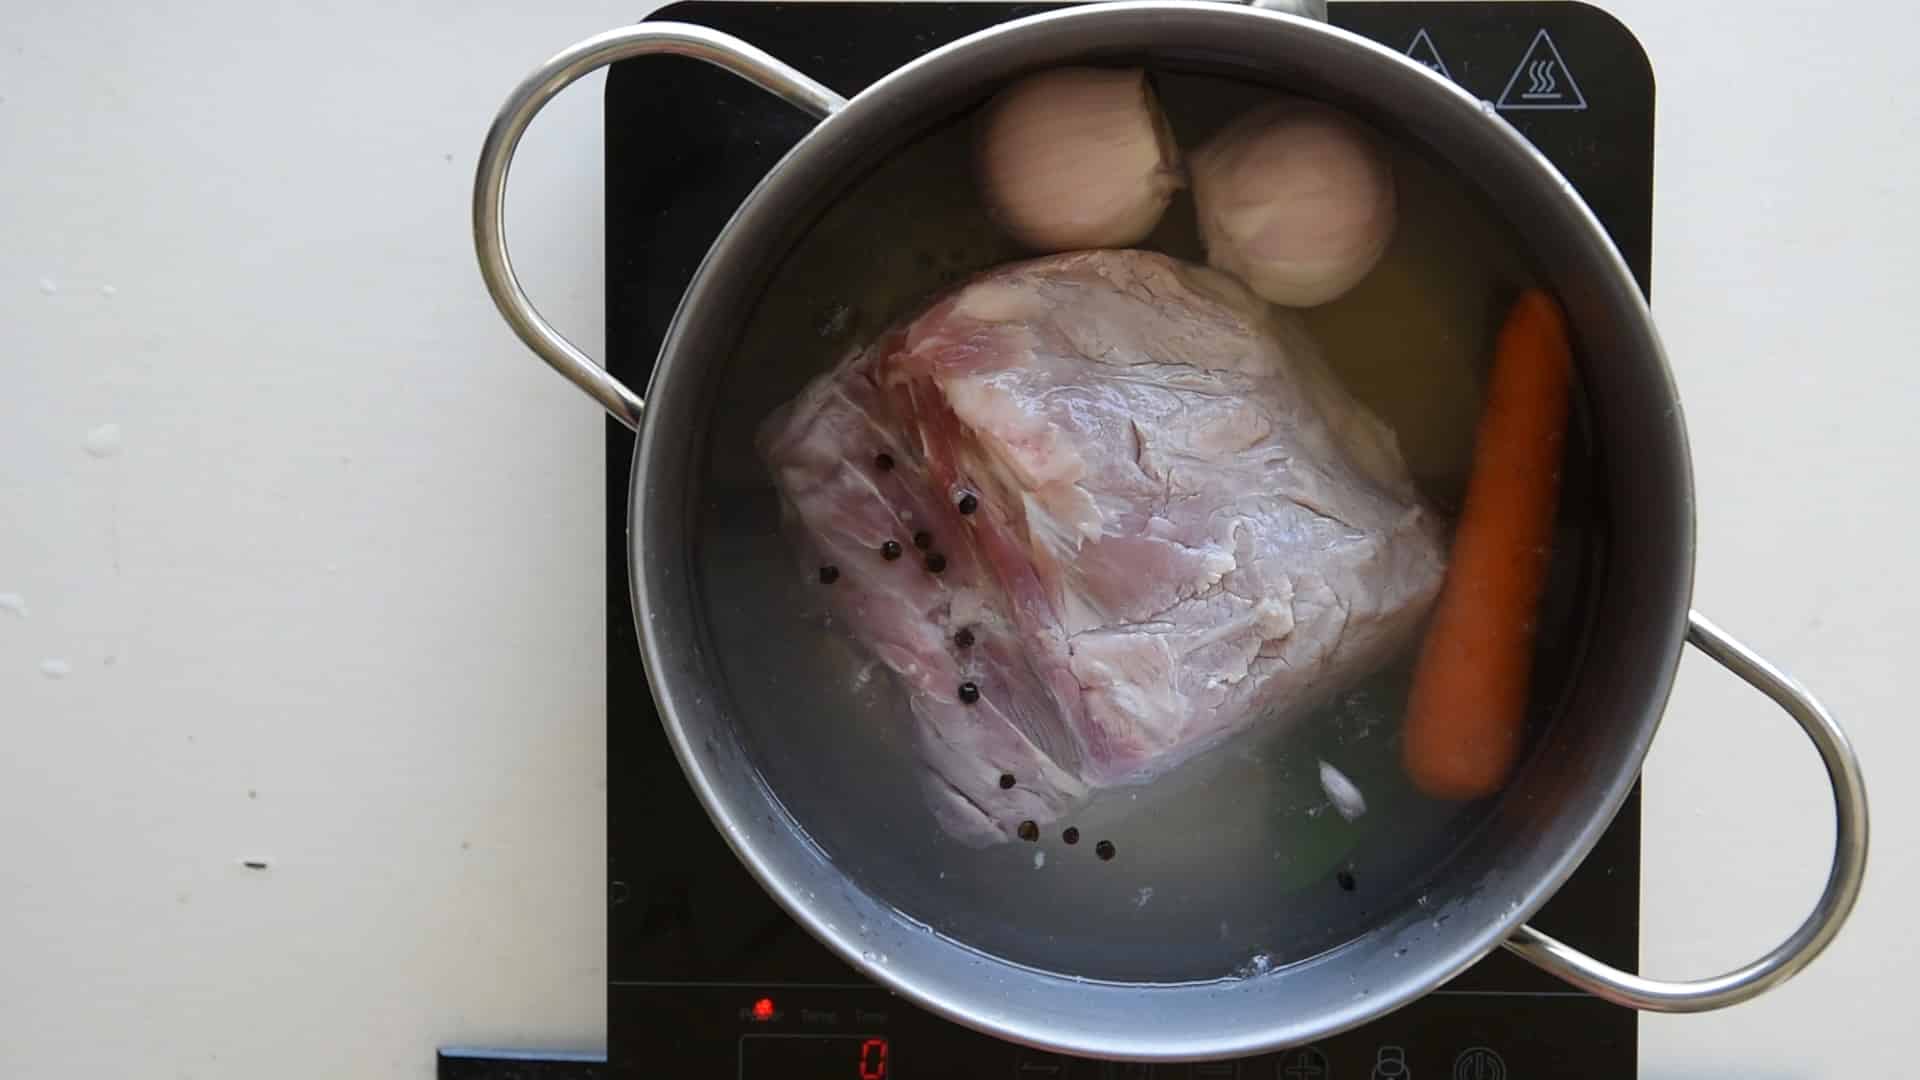 Add the water to cover the meat